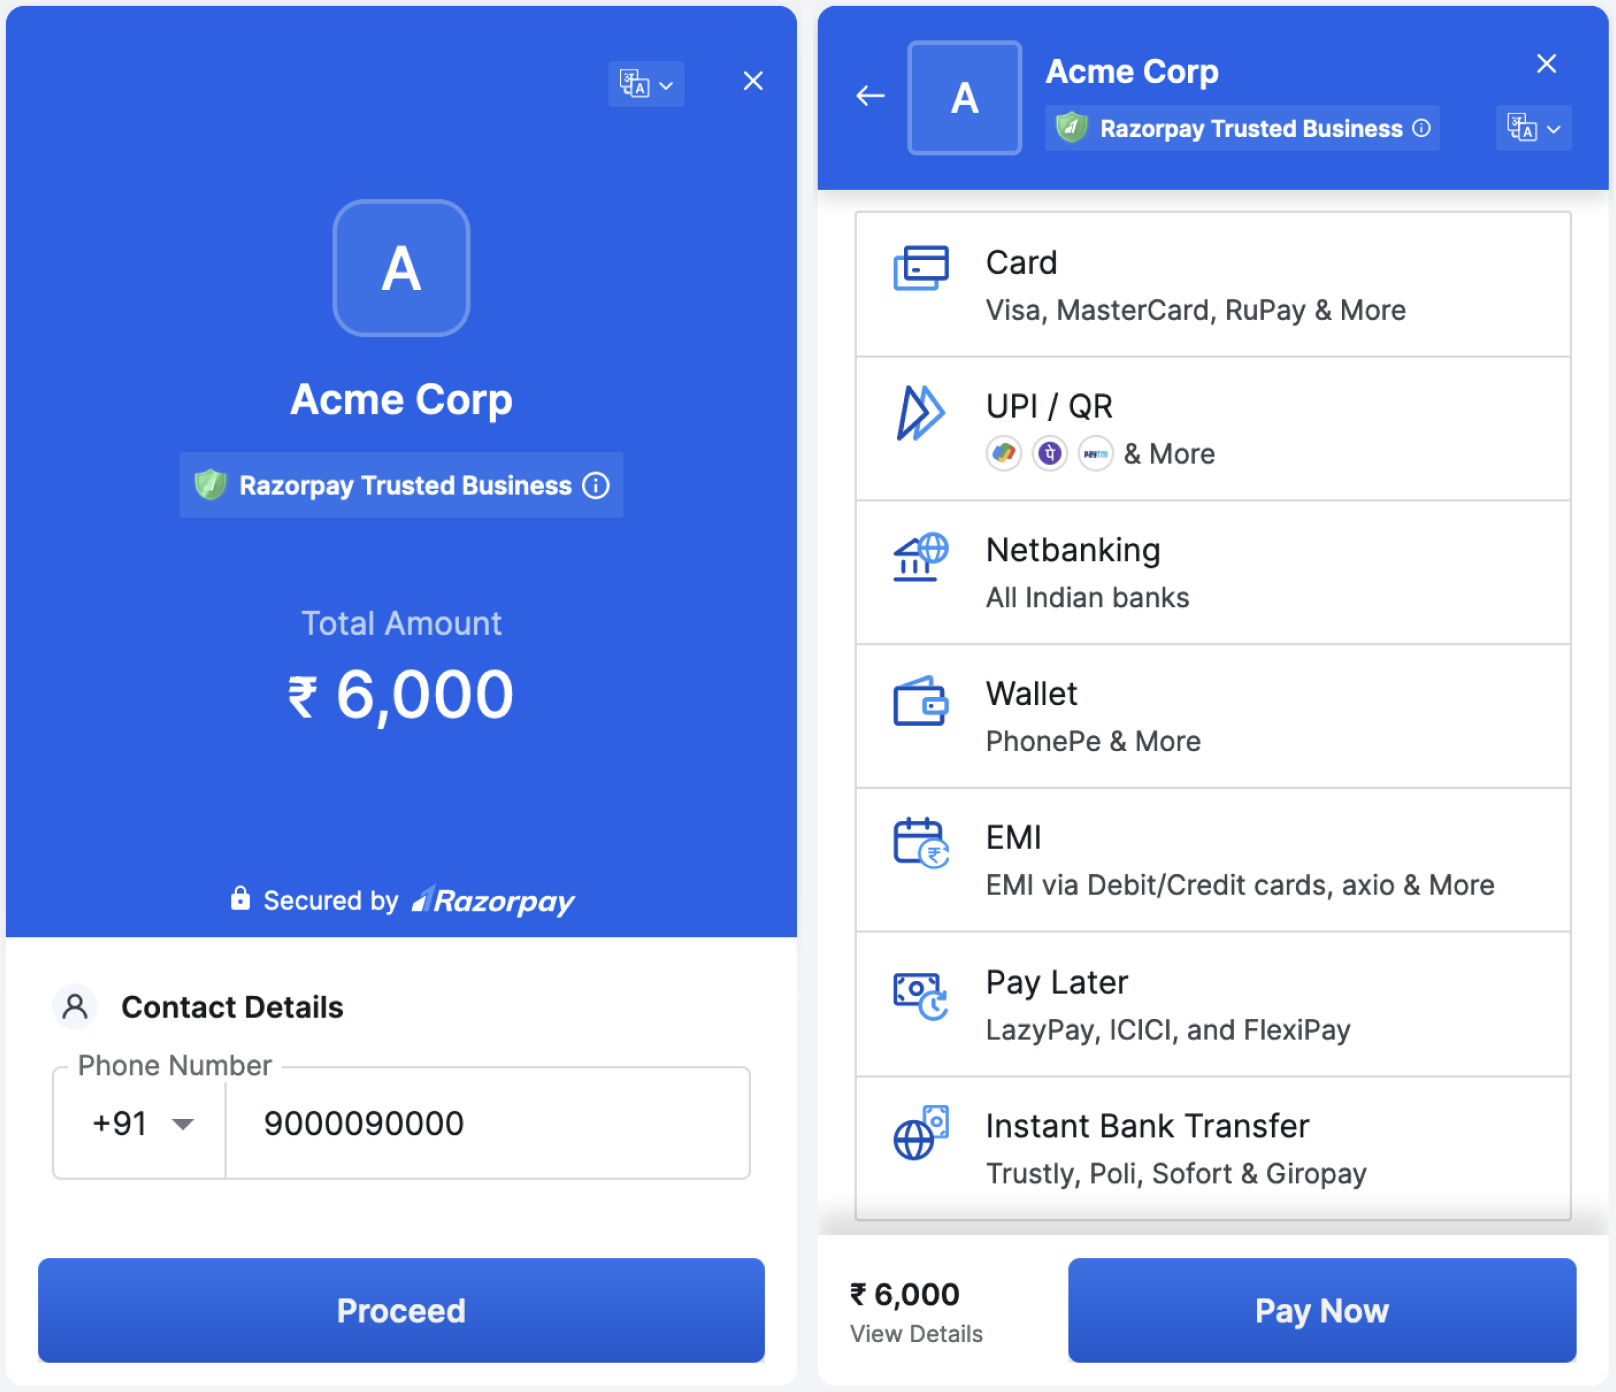 Razorpay Checkout screen showing various Cards, UPI and more payment methods like Wallet, EMI, Pay Later and Instant Bank Transfer for amount payable ₹6000.